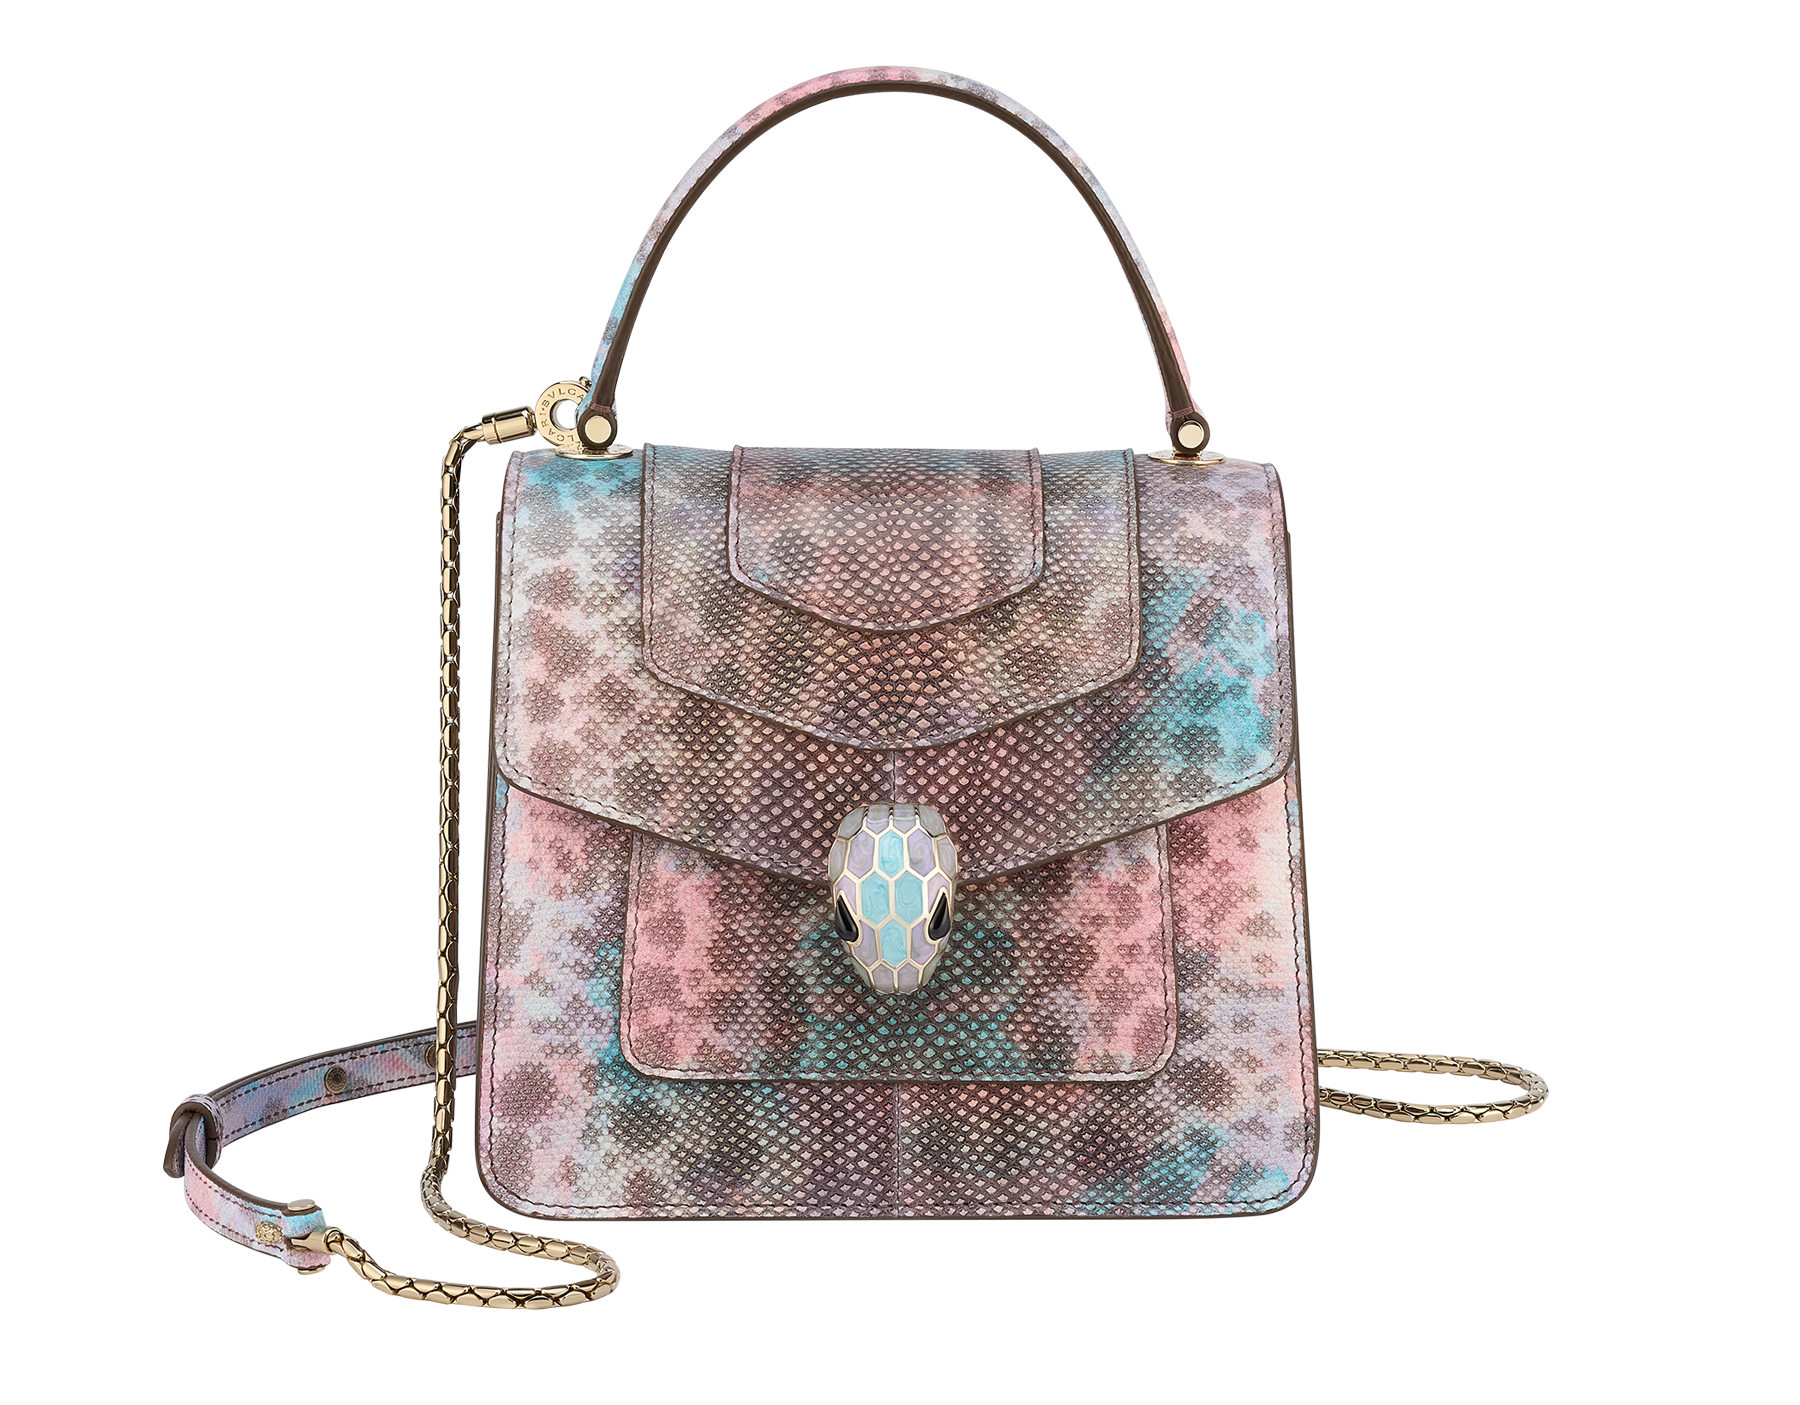 “Serpenti Forever” top-handle bag in shiny Forest Emerald green karung leather with Zircon-bay blue grosgrain inner lining. Iconic snakehead closure in light gold-plated brass embellished with black and agate-white enamel and green malachite eyes 1122-SK image 1